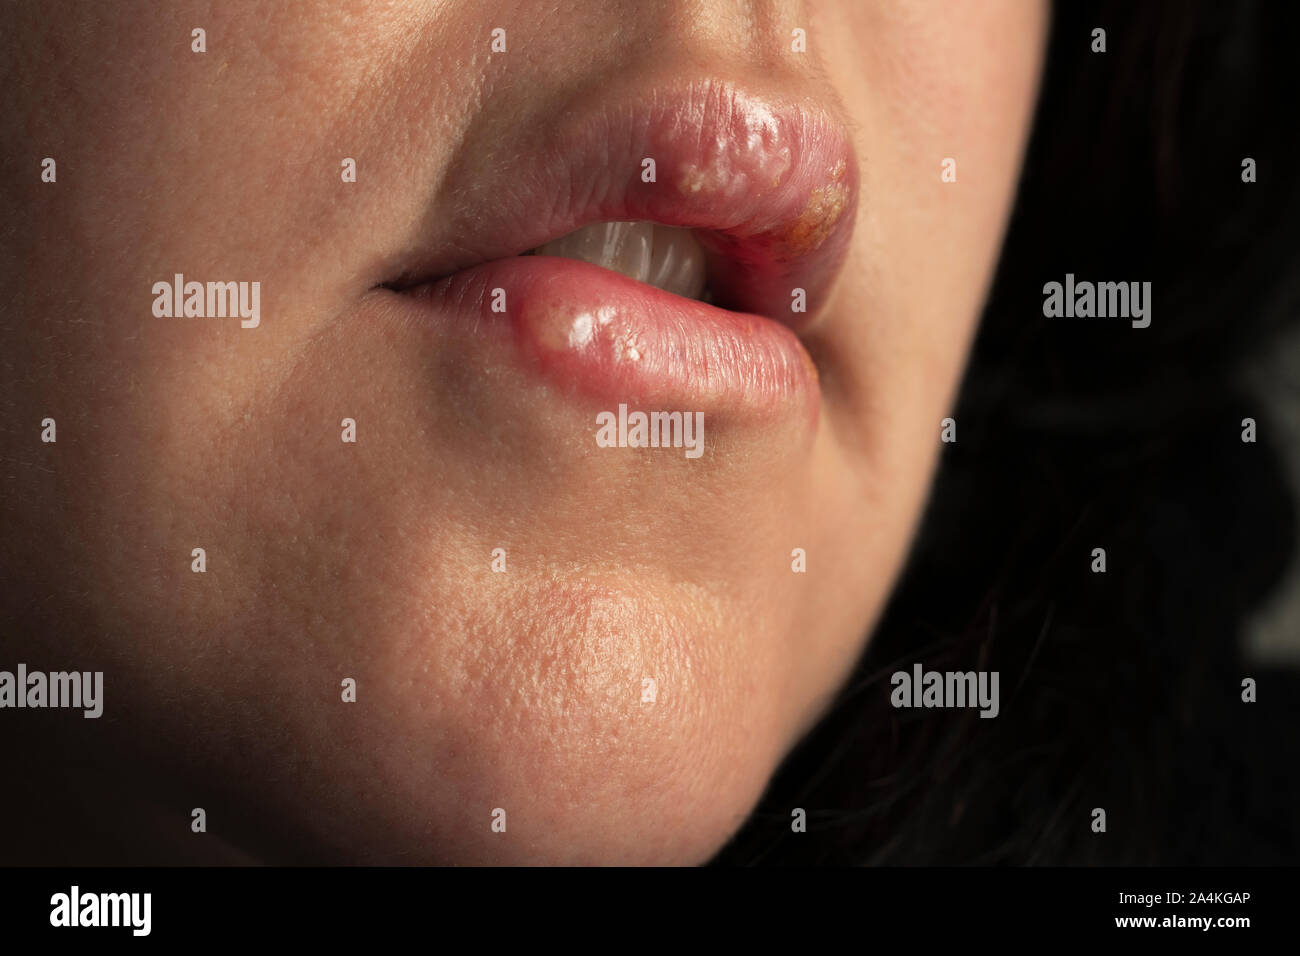 Close up of a lady with multiple coldsores on both her lips Stock Photo